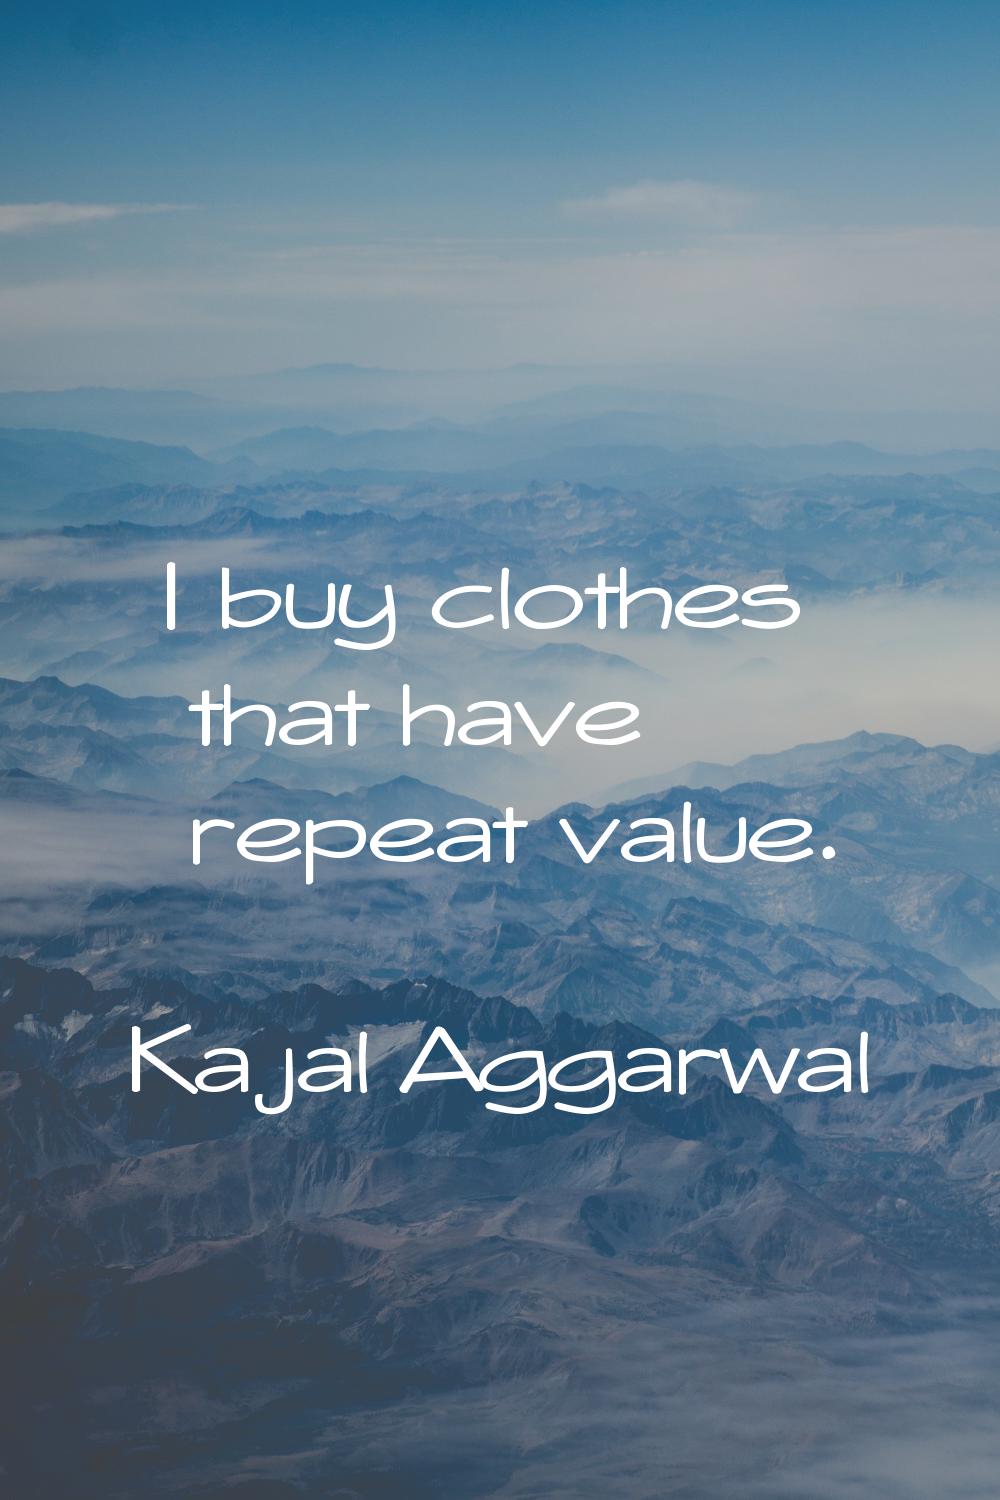 I buy clothes that have repeat value.